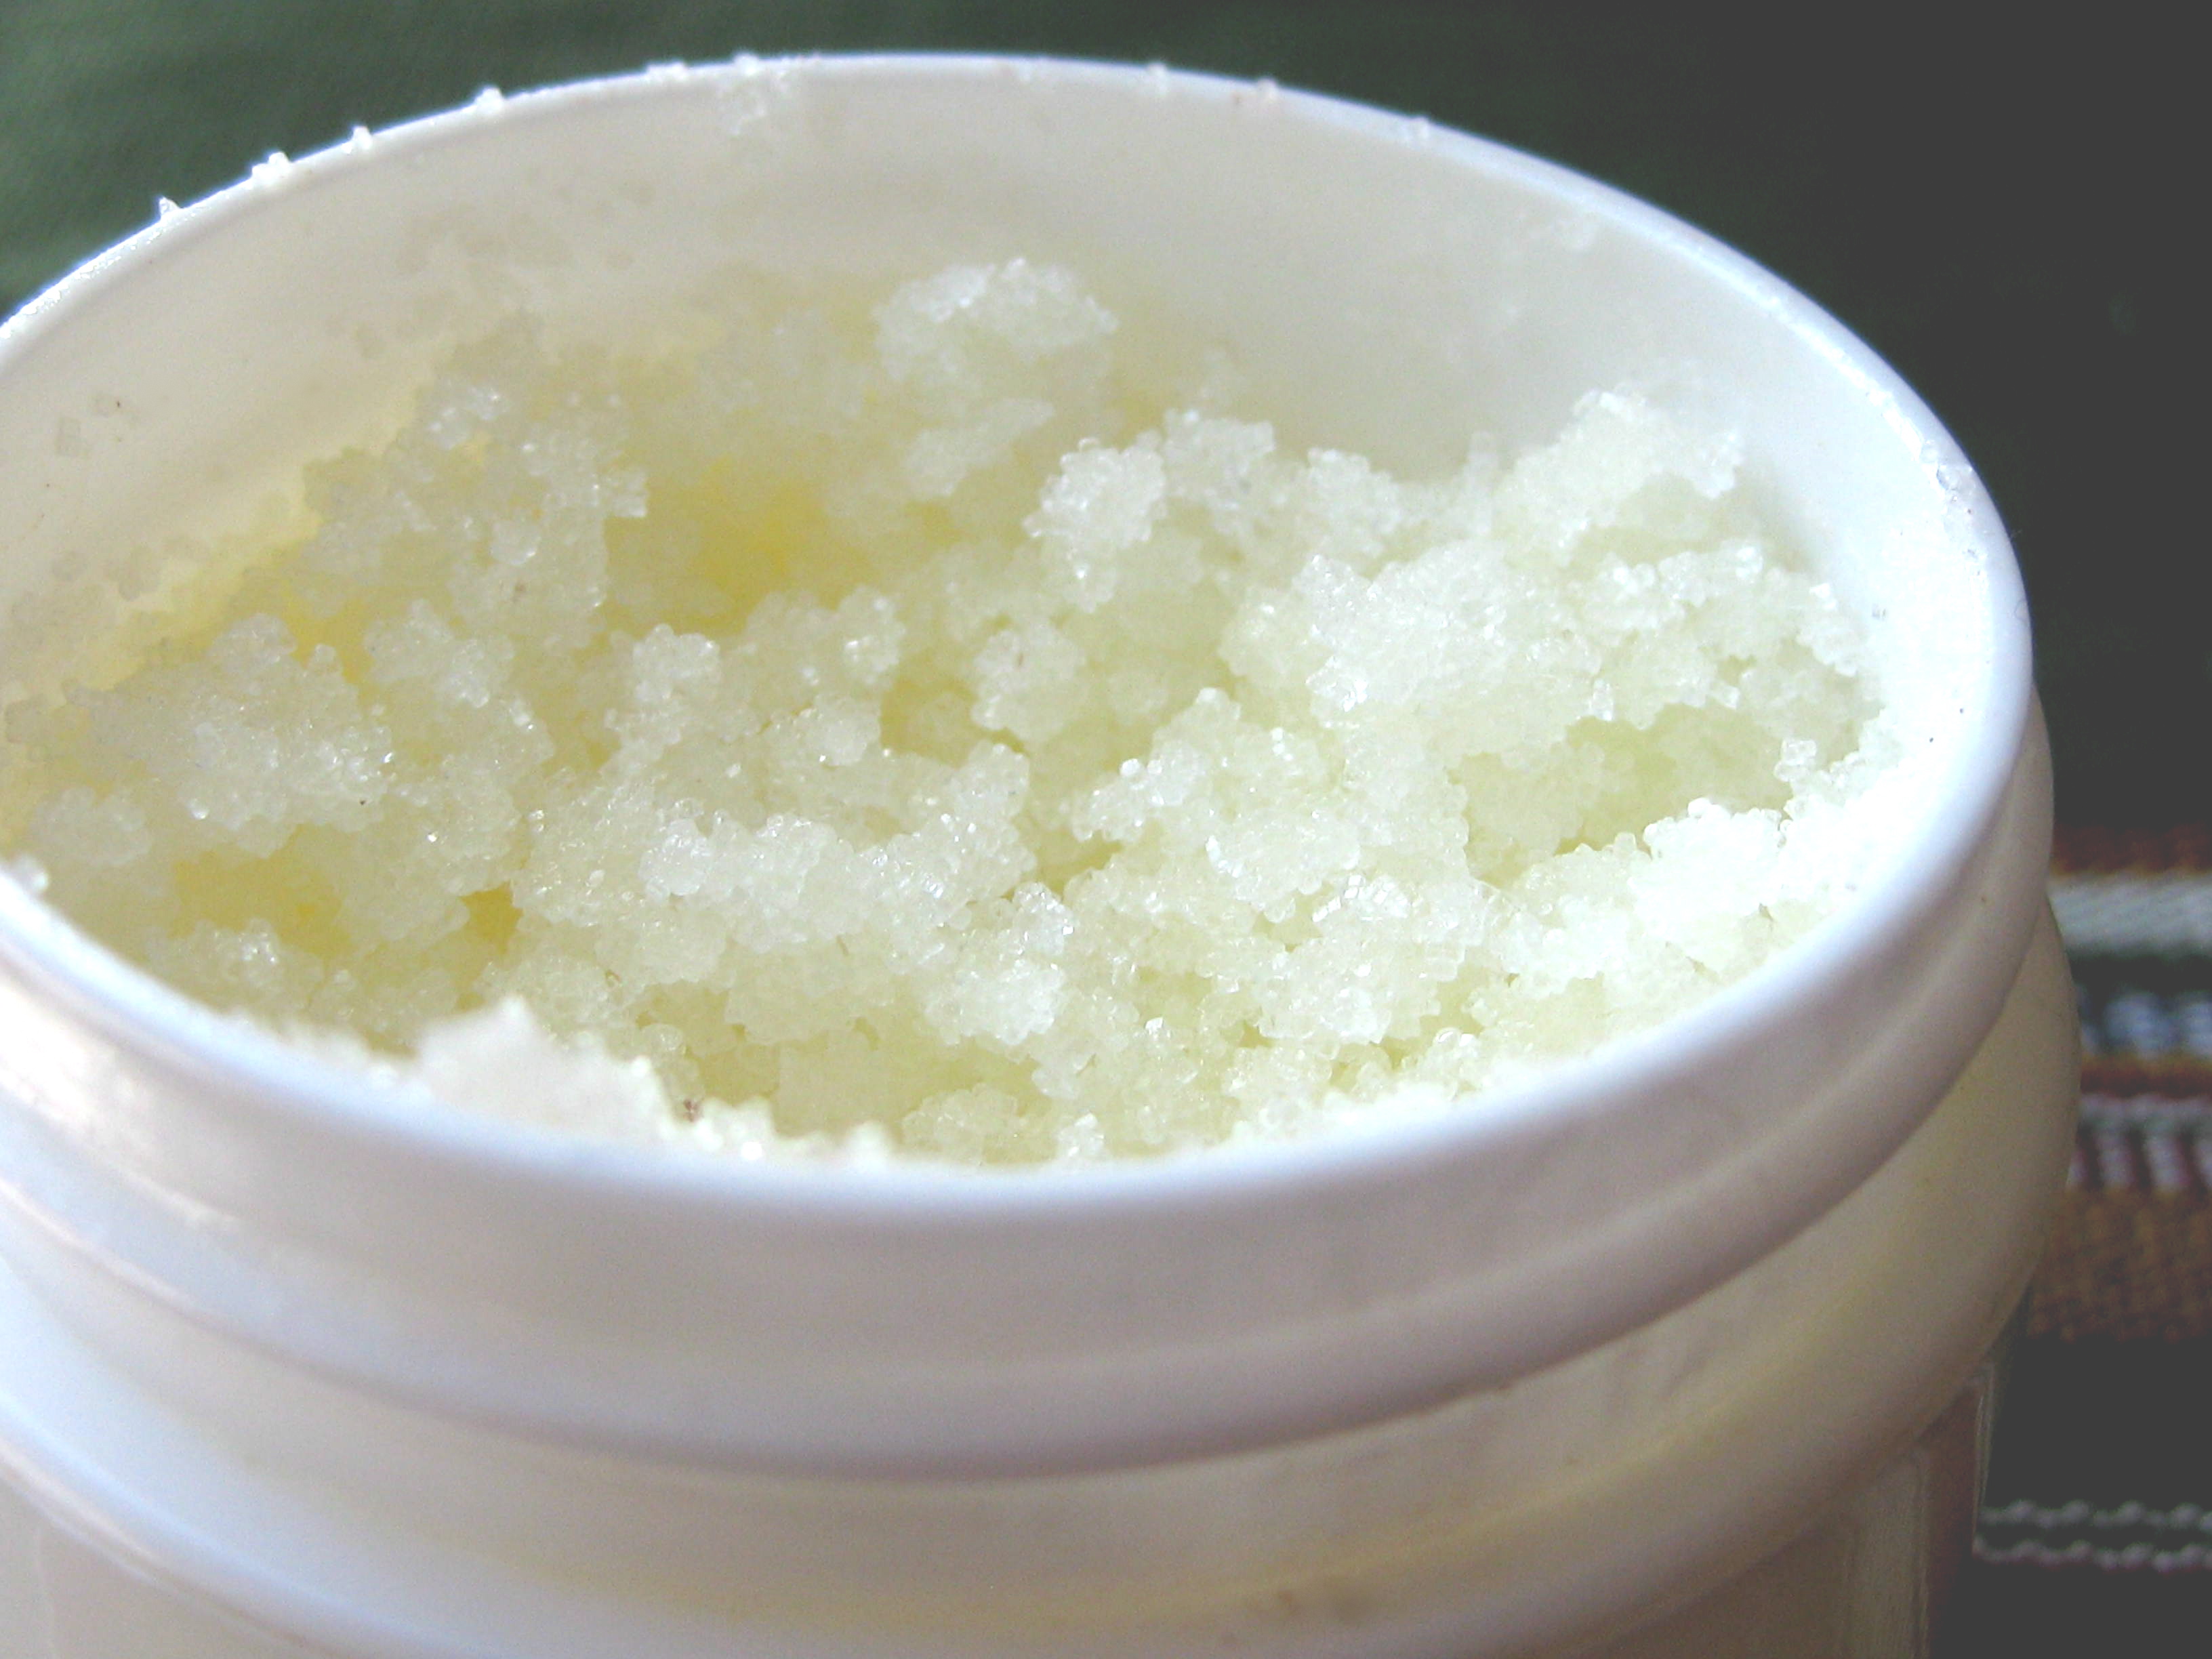 Lemon and sugar face scrub for skin discolorations